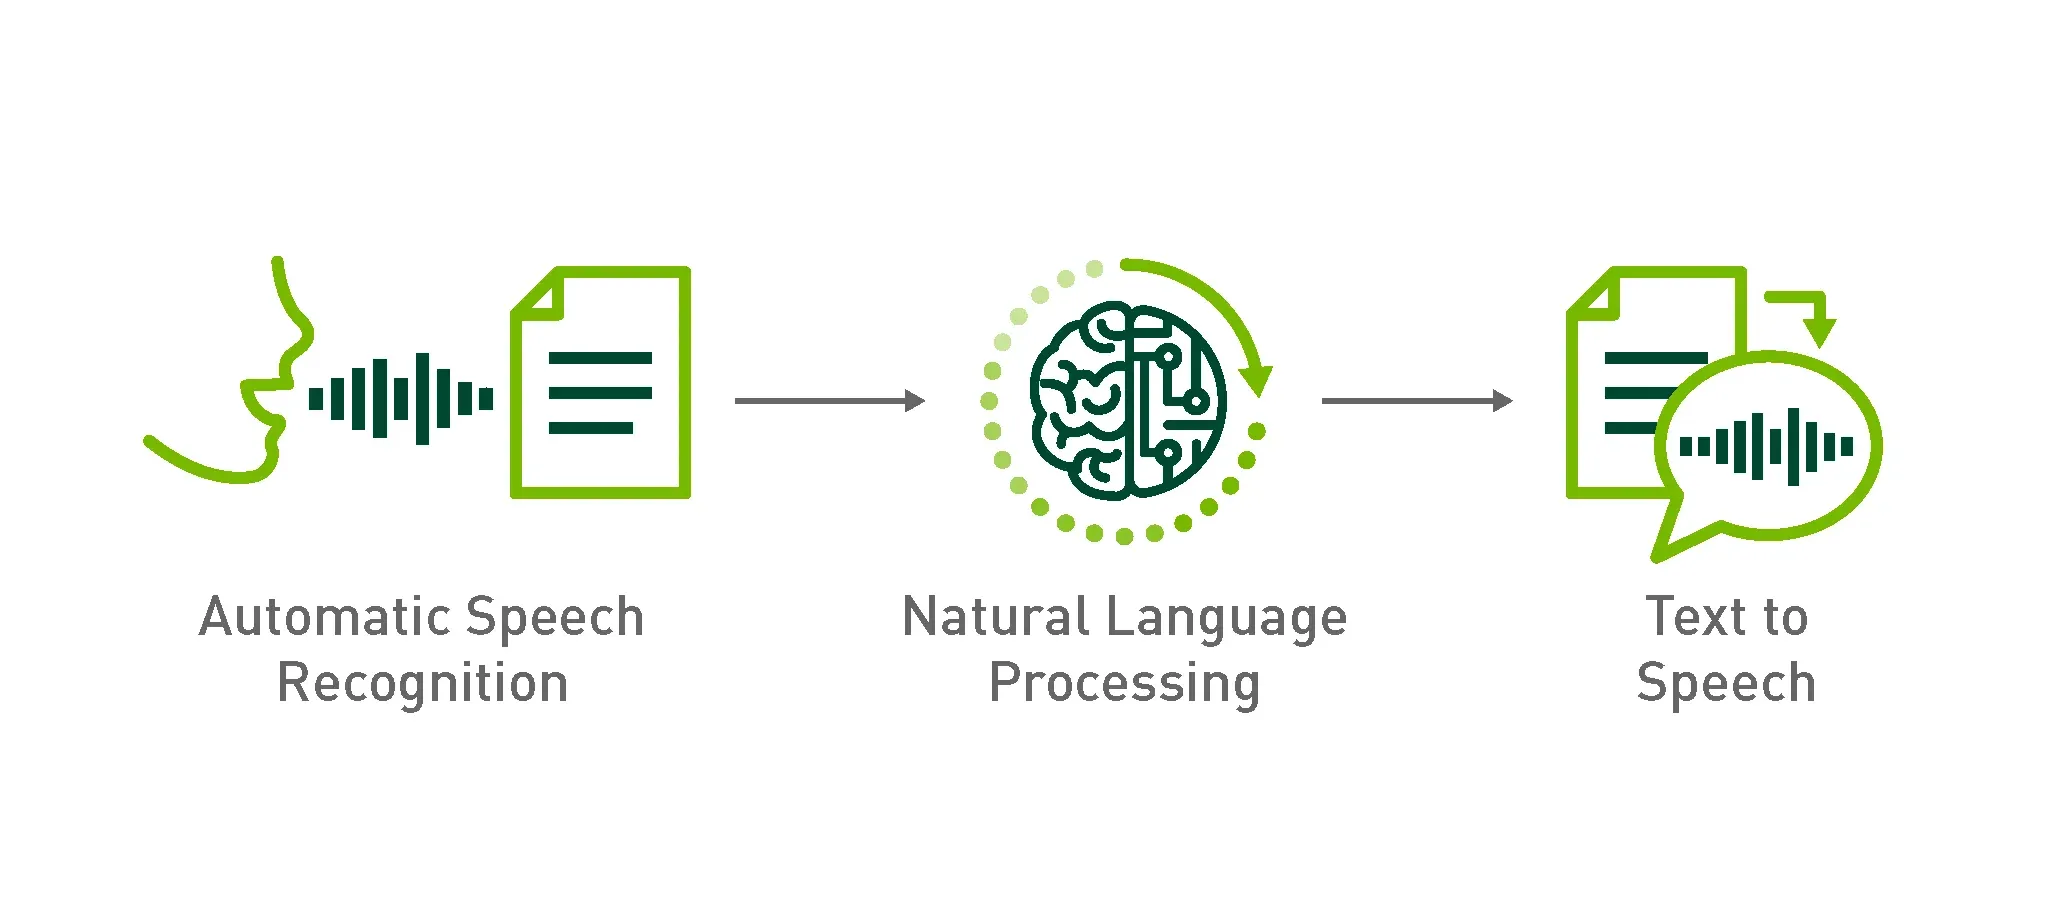 Use of NLP in Voice-to-Text Applications